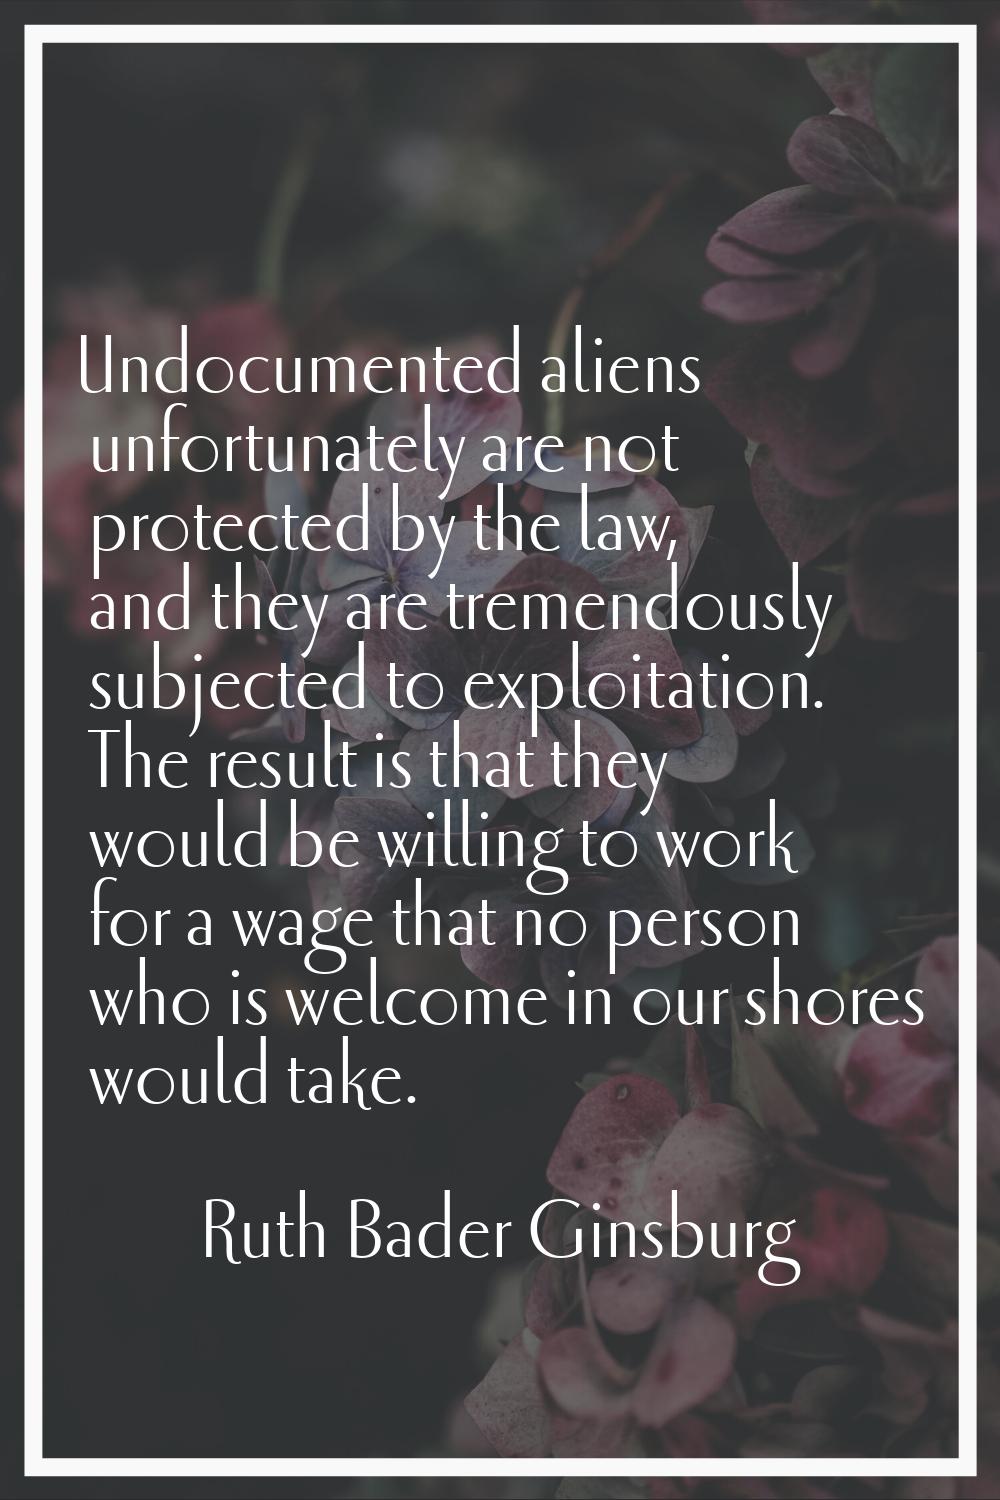 Undocumented aliens unfortunately are not protected by the law, and they are tremendously subjected